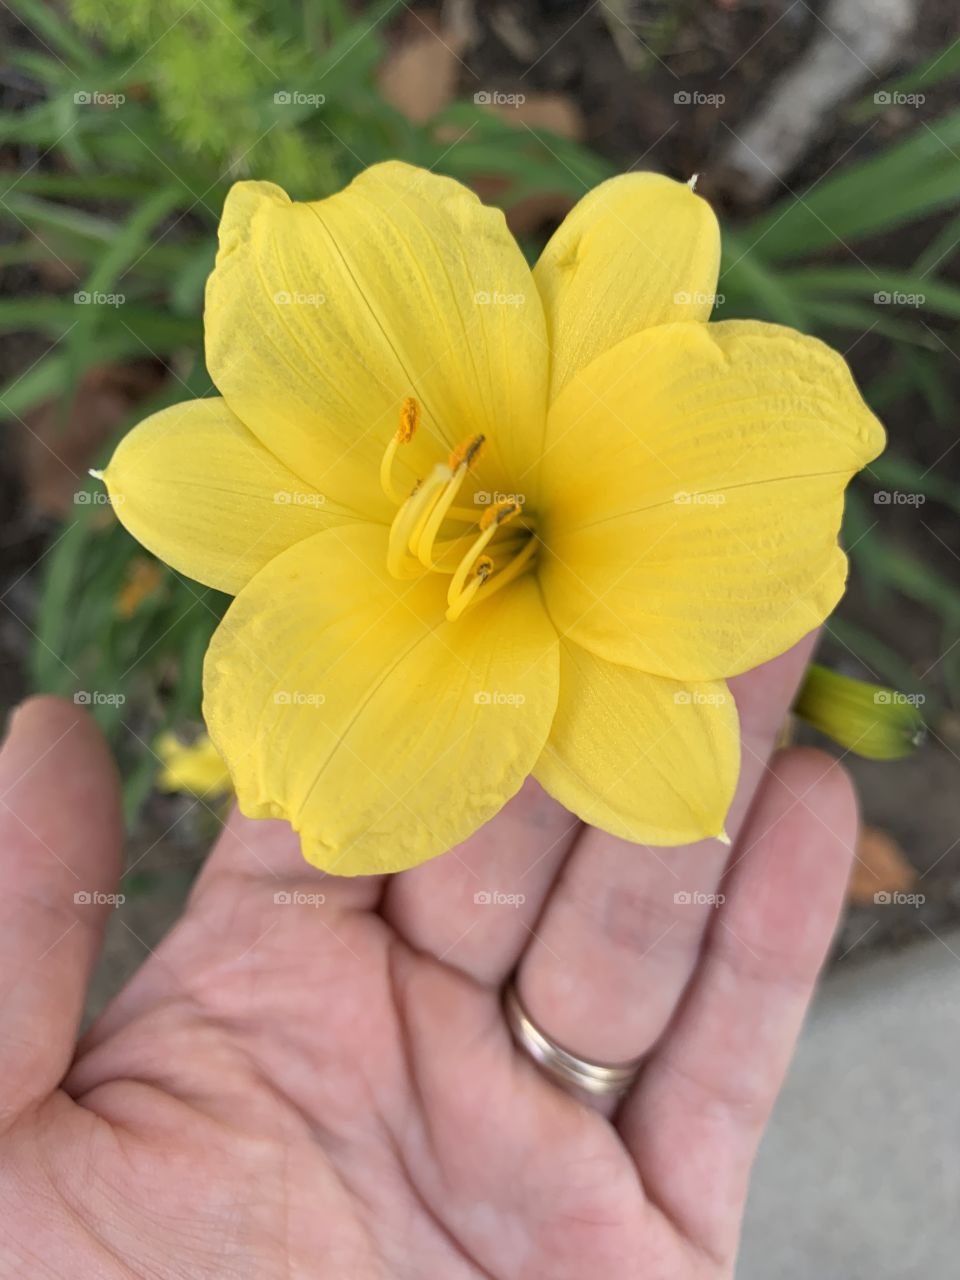 A gorgeous bright yellow flower in bloom on a fall day